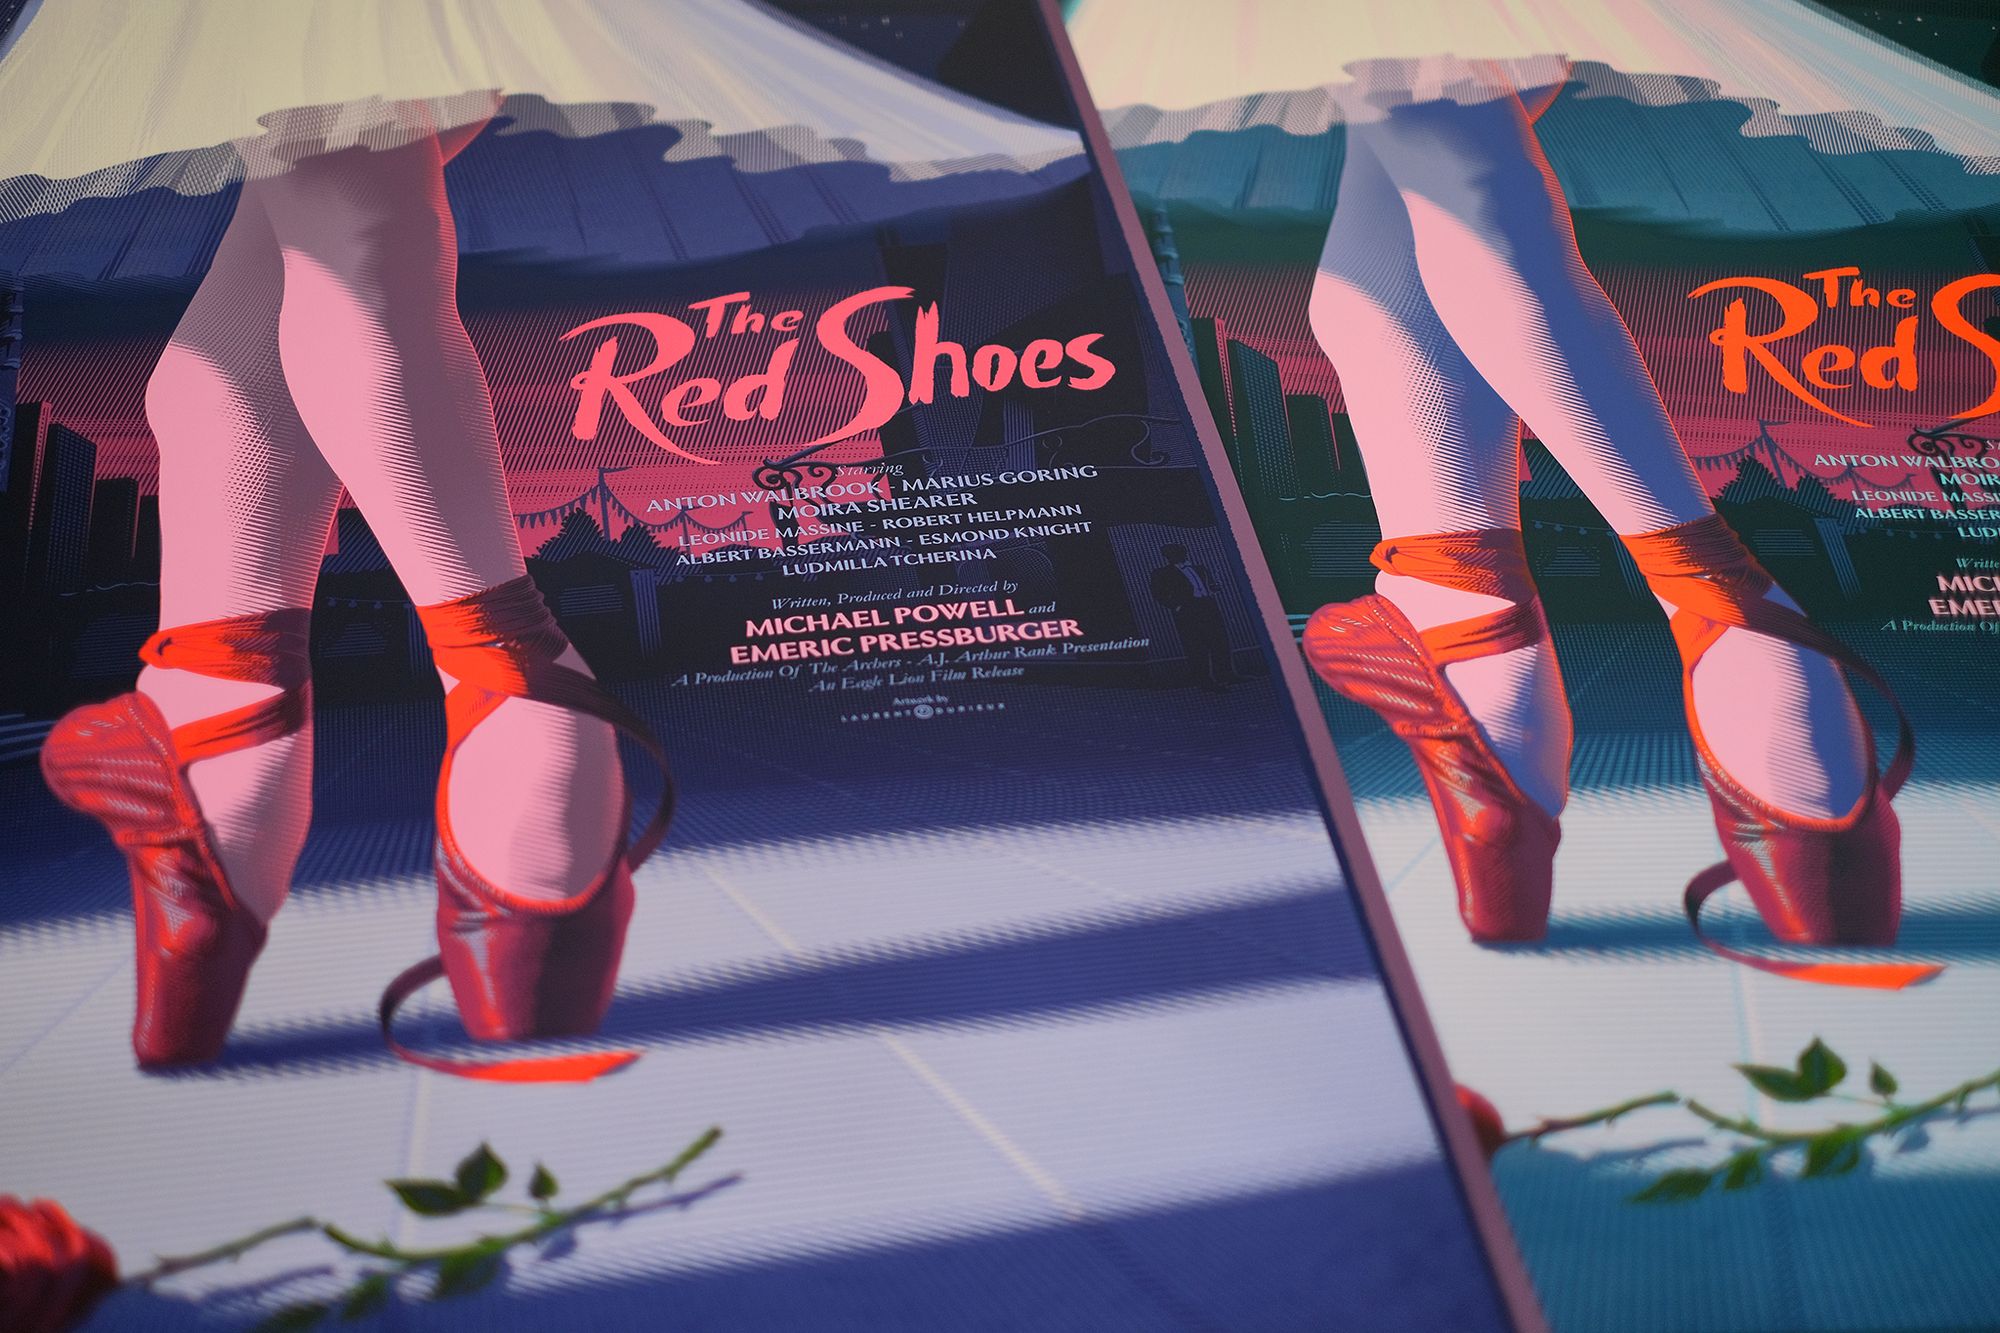 The Red Shoes, screenprint edition by Laurent Durieux and Dark City Gallery